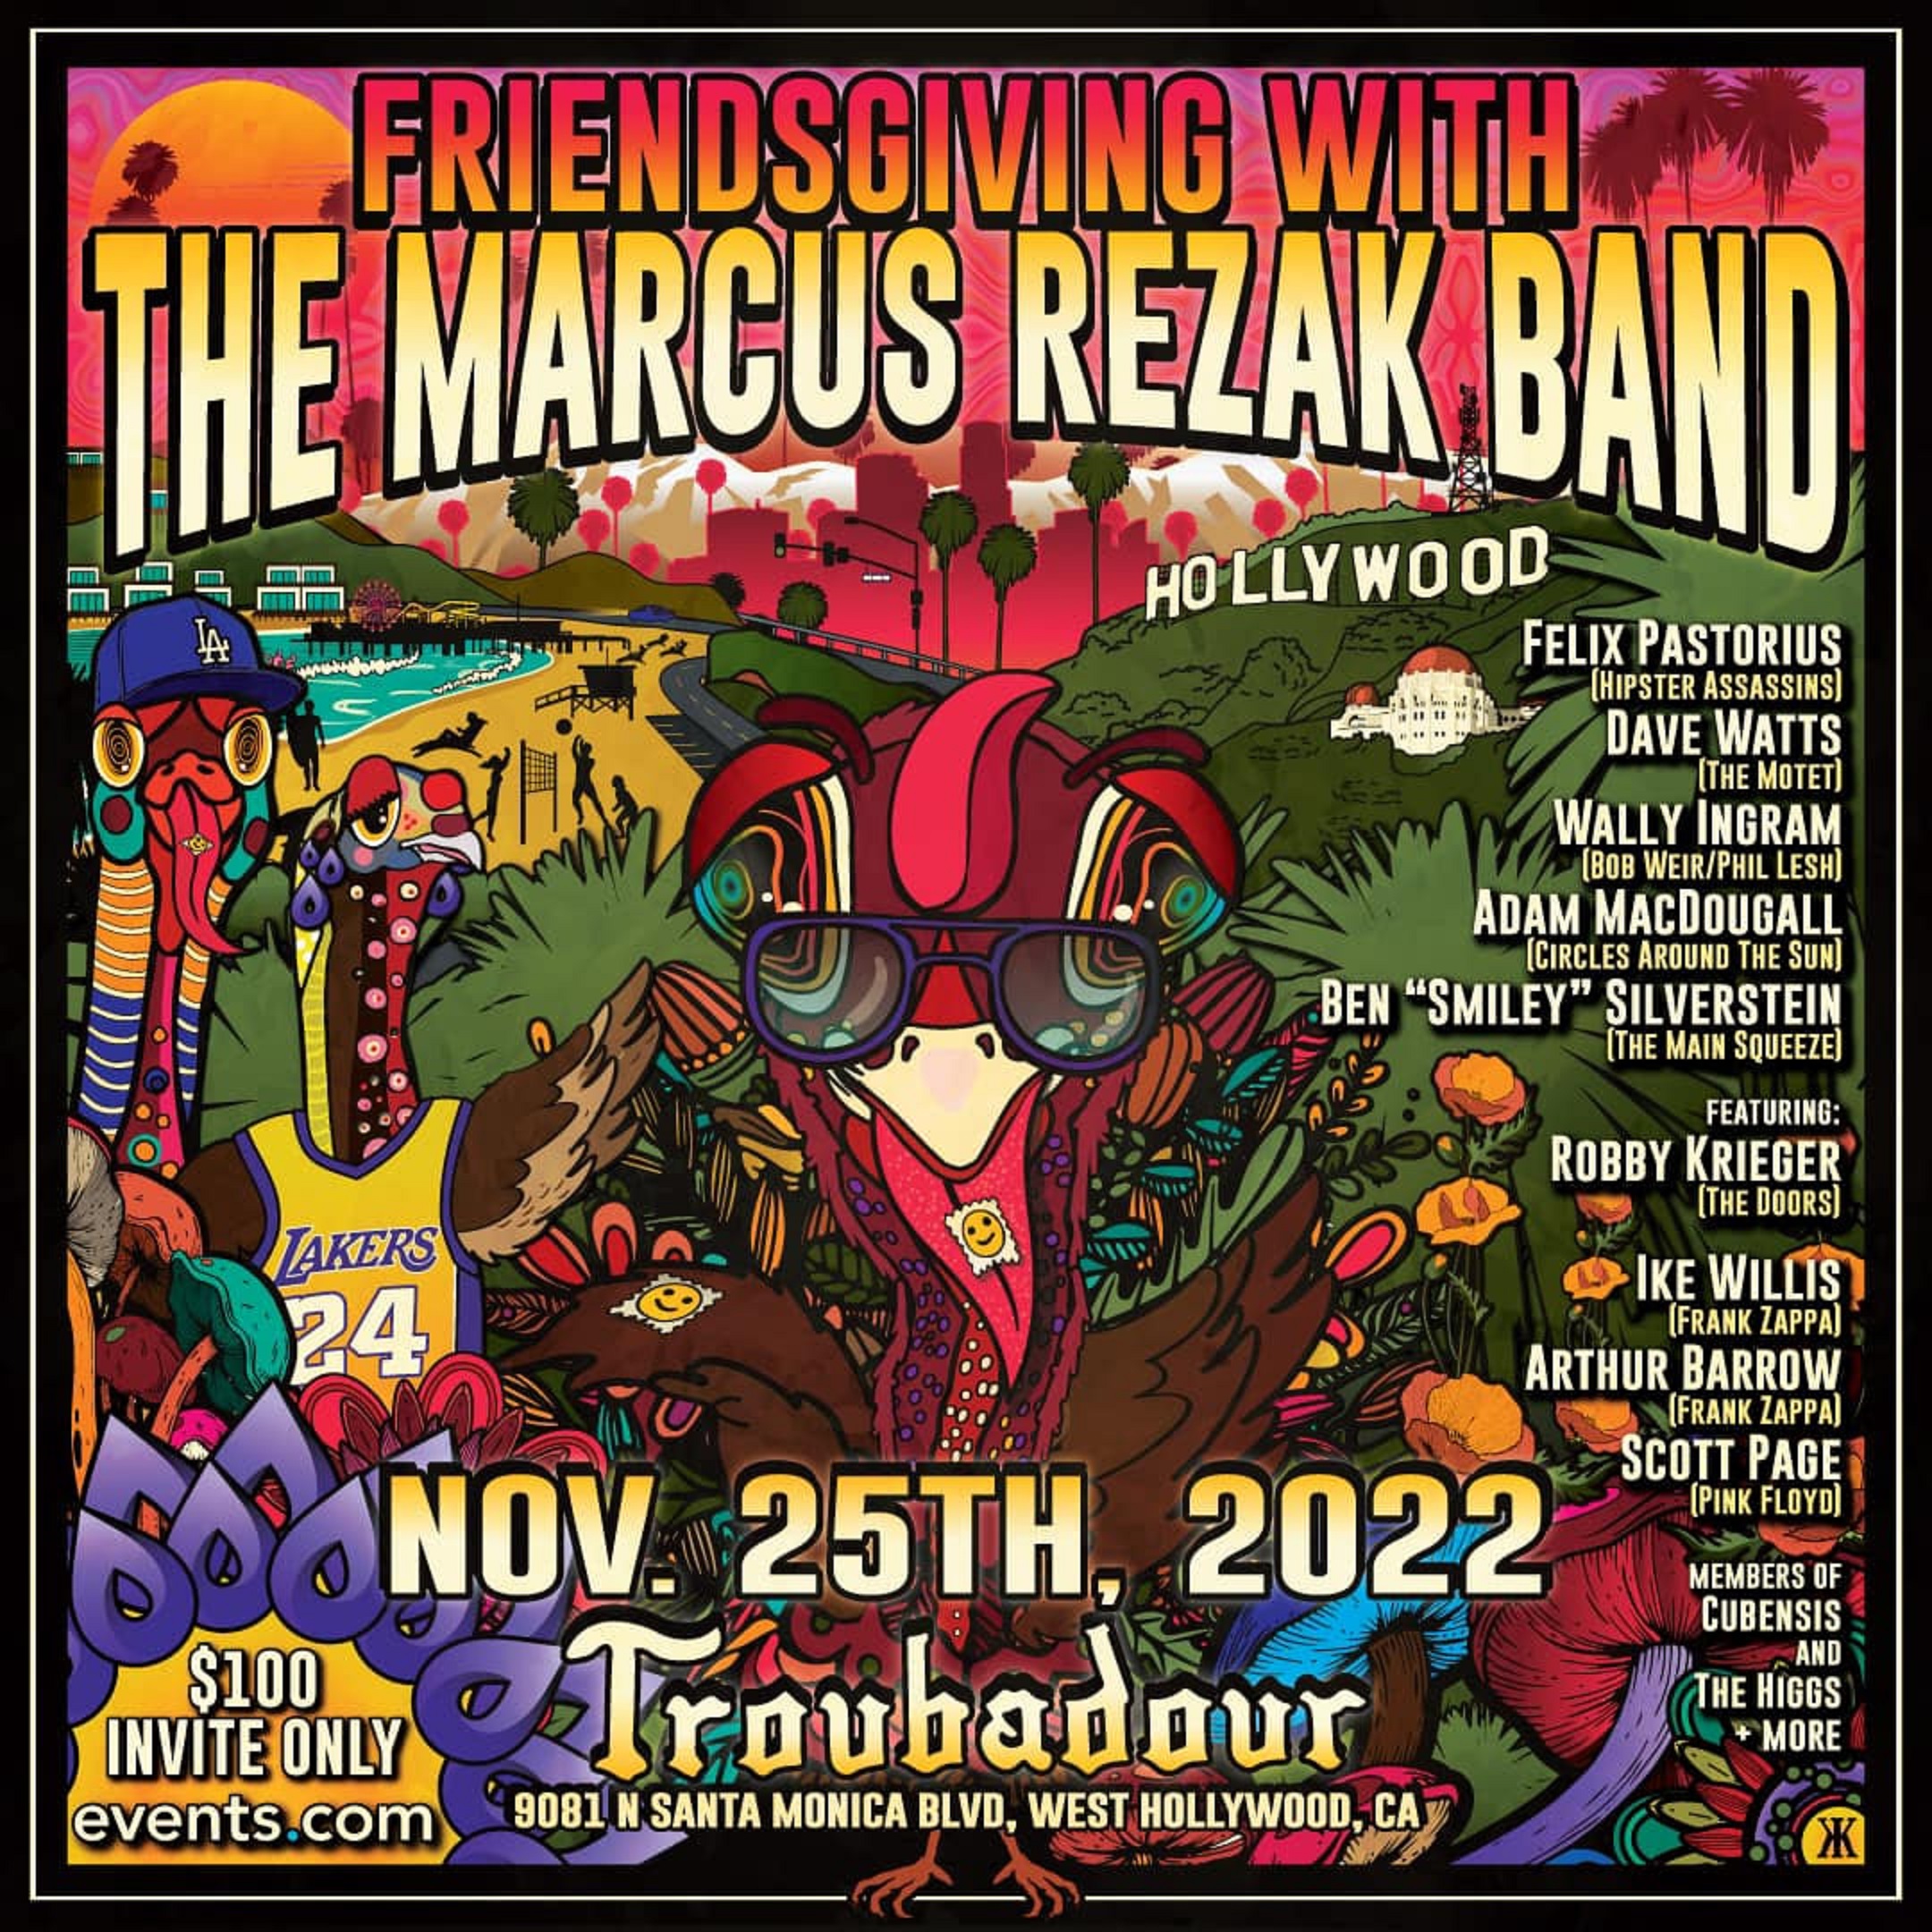 MARCUS REZAK & PR PRODUCTIONS ASSEMBLE AN ALL-STAR LINEUP FT. MEMBERS OF THE DOORS, FRANK ZAPPA, PINK FLOYD, THE MOTET & MORE FOR FRIENDSGIVING SHOW AT TROUBADOUR IN WEST HOLLYWOOD